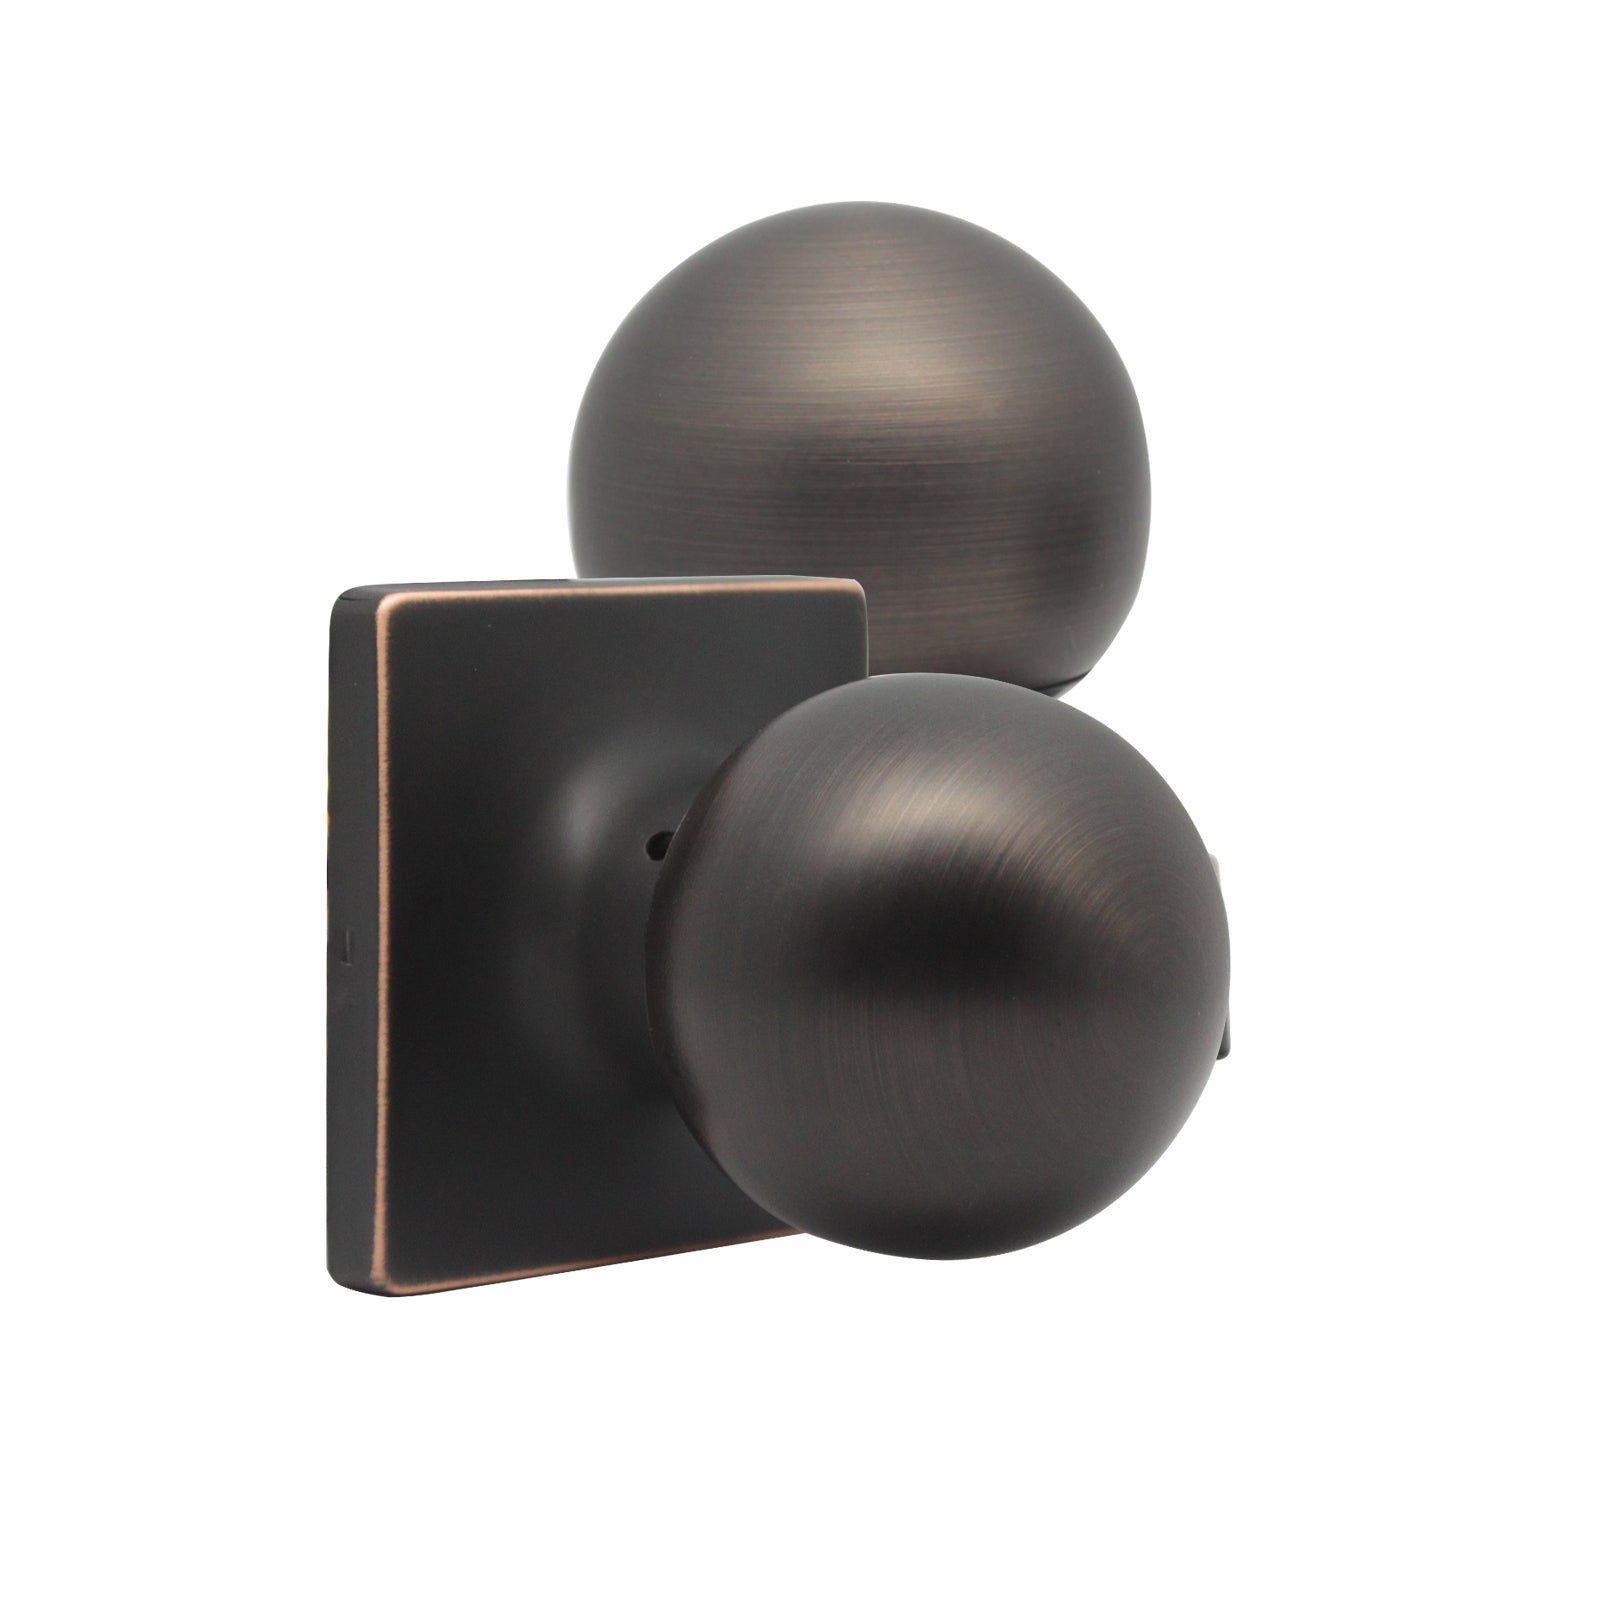 Round Ball Knob with Square Rosette, Interior Passage Door Knobs Oil Rubbed Bronze DLS07ORBPS